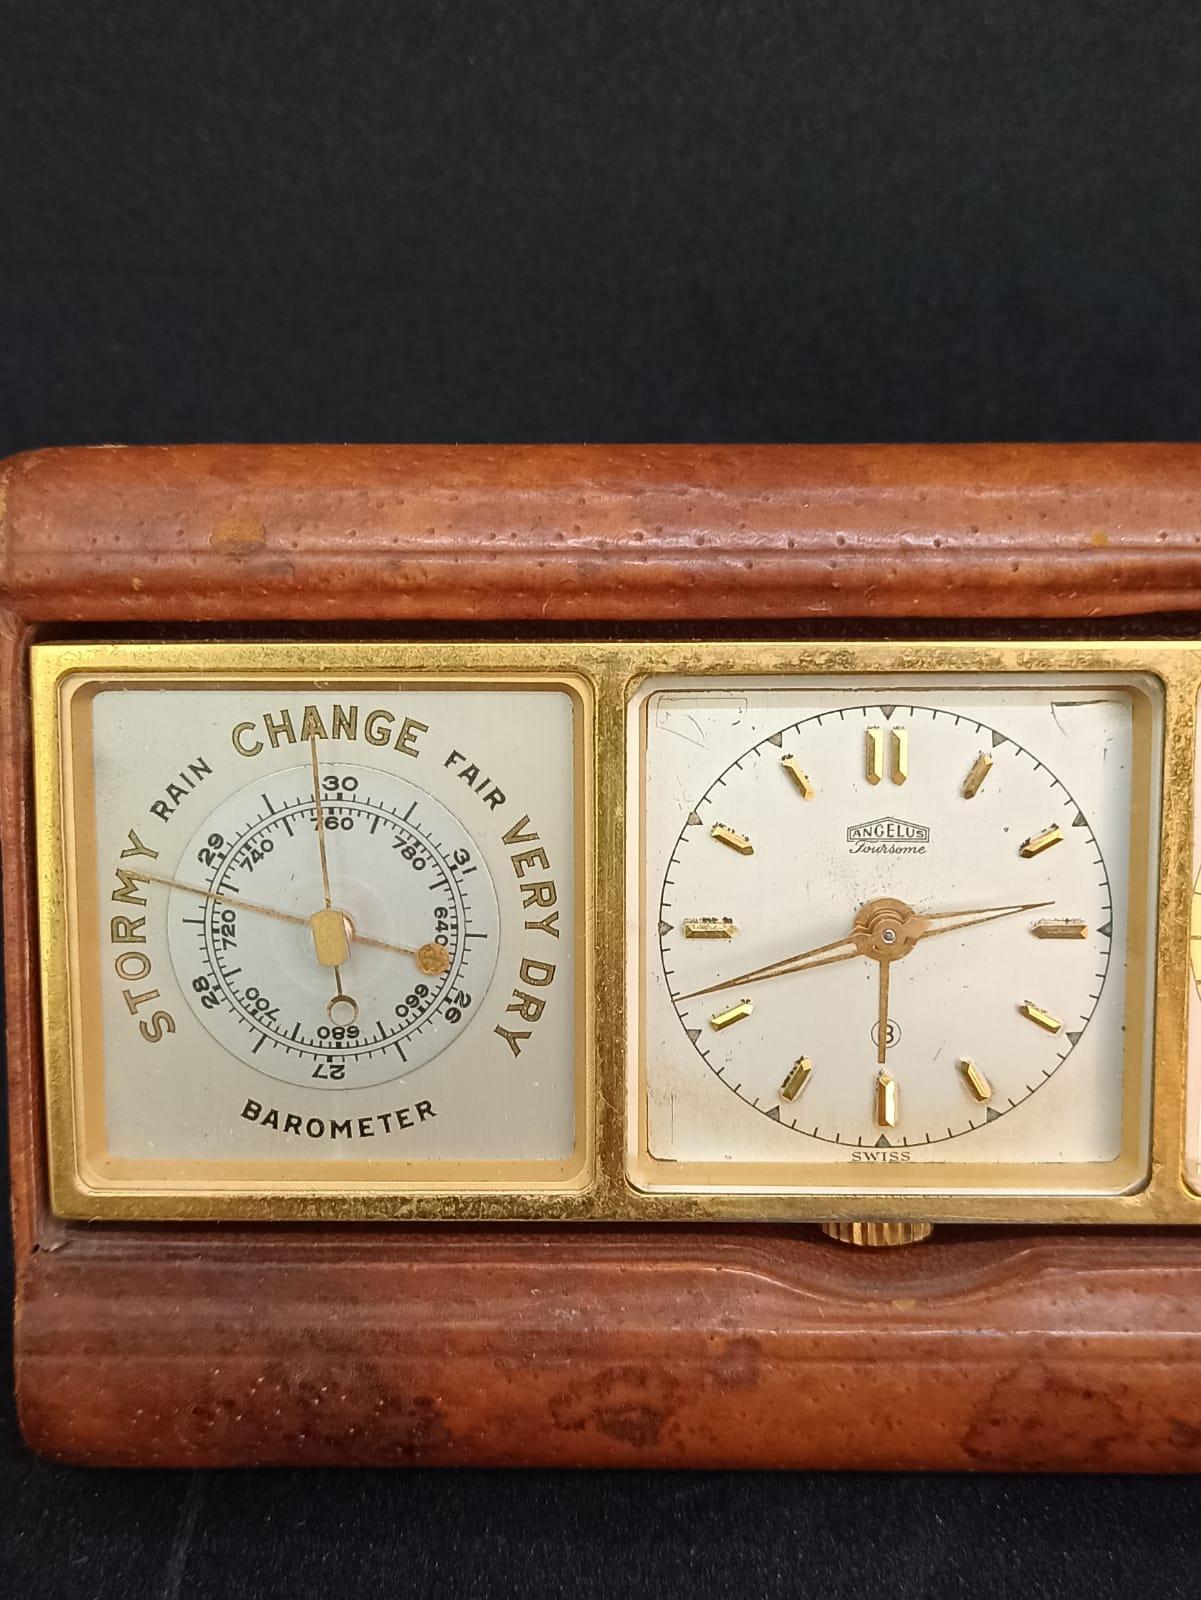 Angelus meteorological station Switzerland winding watch 1960
clock to wind with duration of 8 days
Materials Bronze and leather
Origin Switzerland Circa 1930
It has signs of use and some natural wear on the leather.
Machinery in good condition